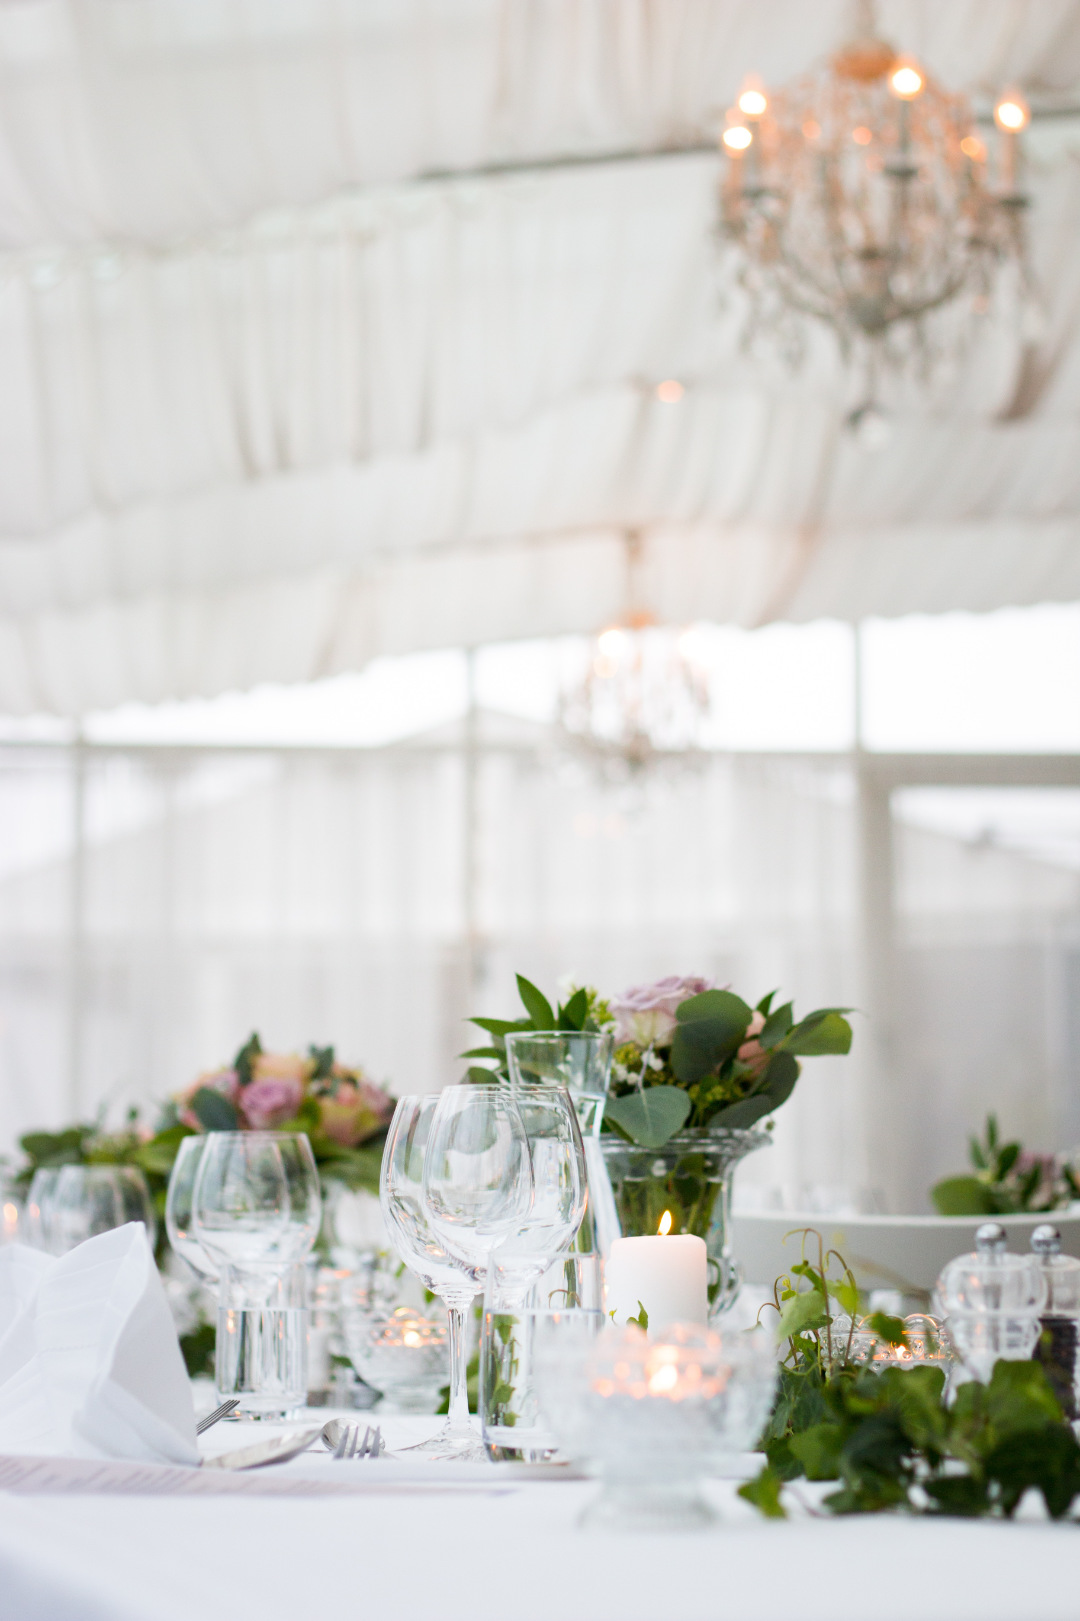 Wedding table setup with candles and glasses